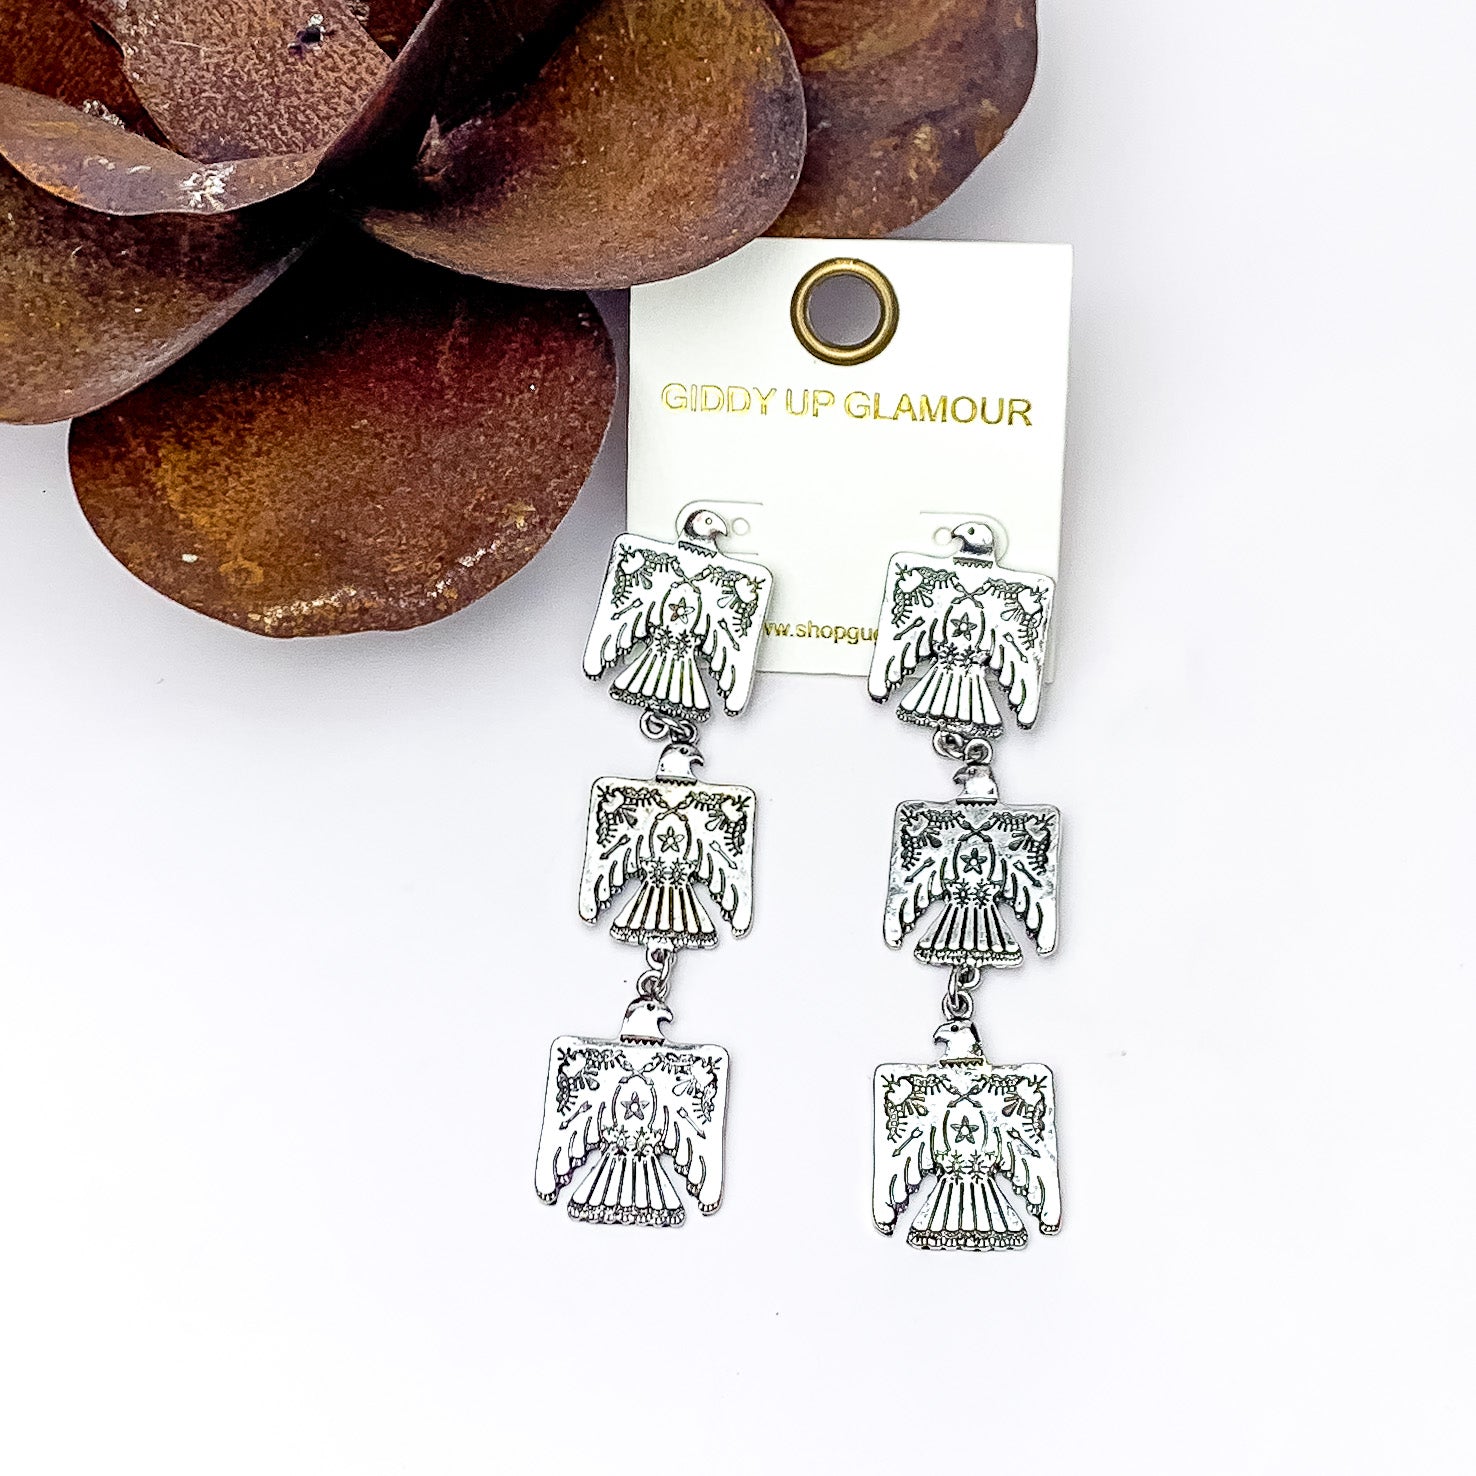 Silver Tone Free bird Three Tier Earrings. Pictured on a white background with a metal flower in the top left corner.